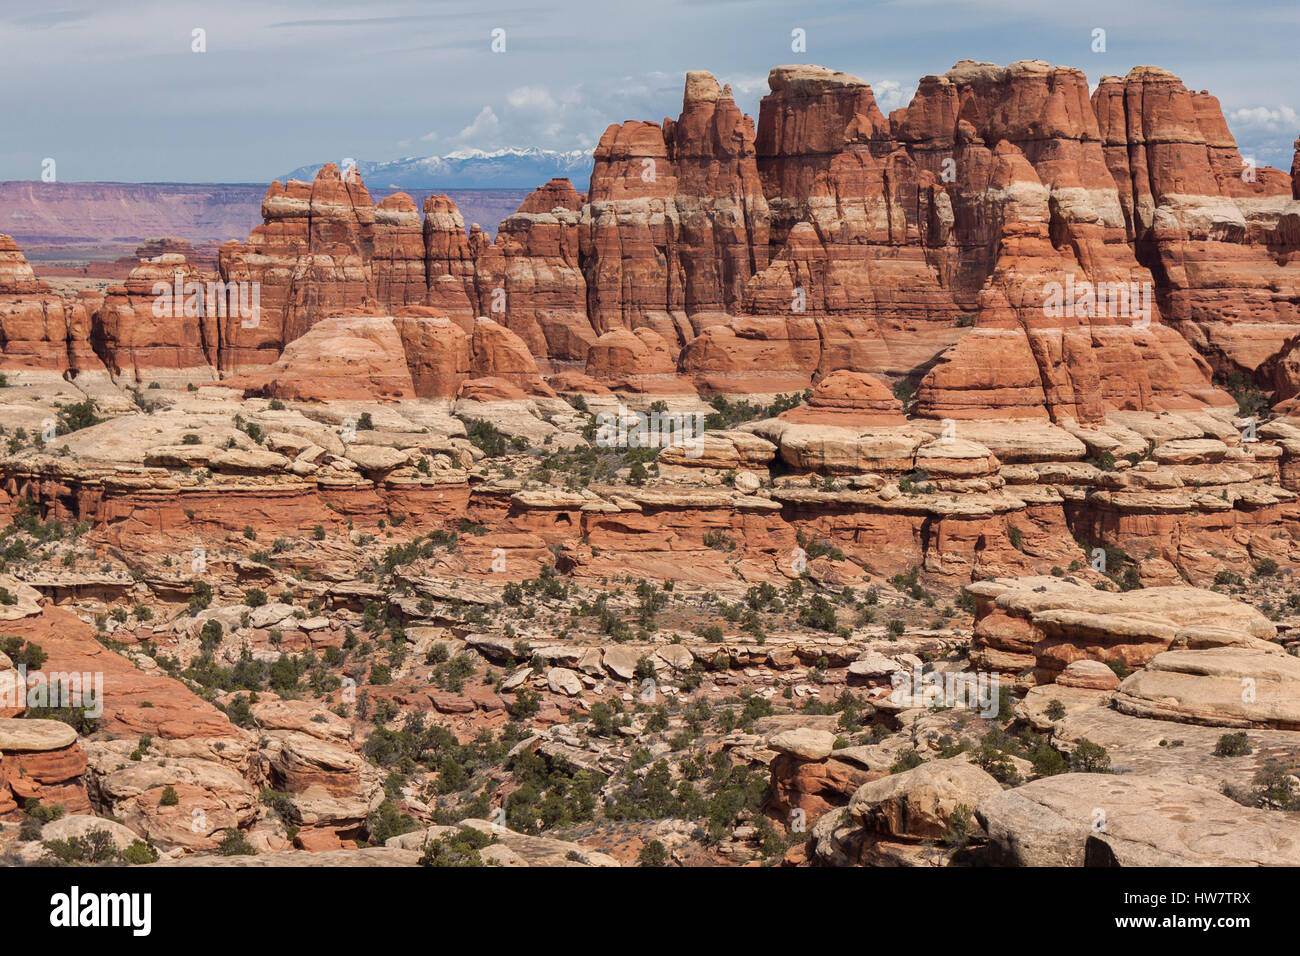 Mountains and rock formations in the Needles District of Canyonlands National Park, UT. Stock Photo